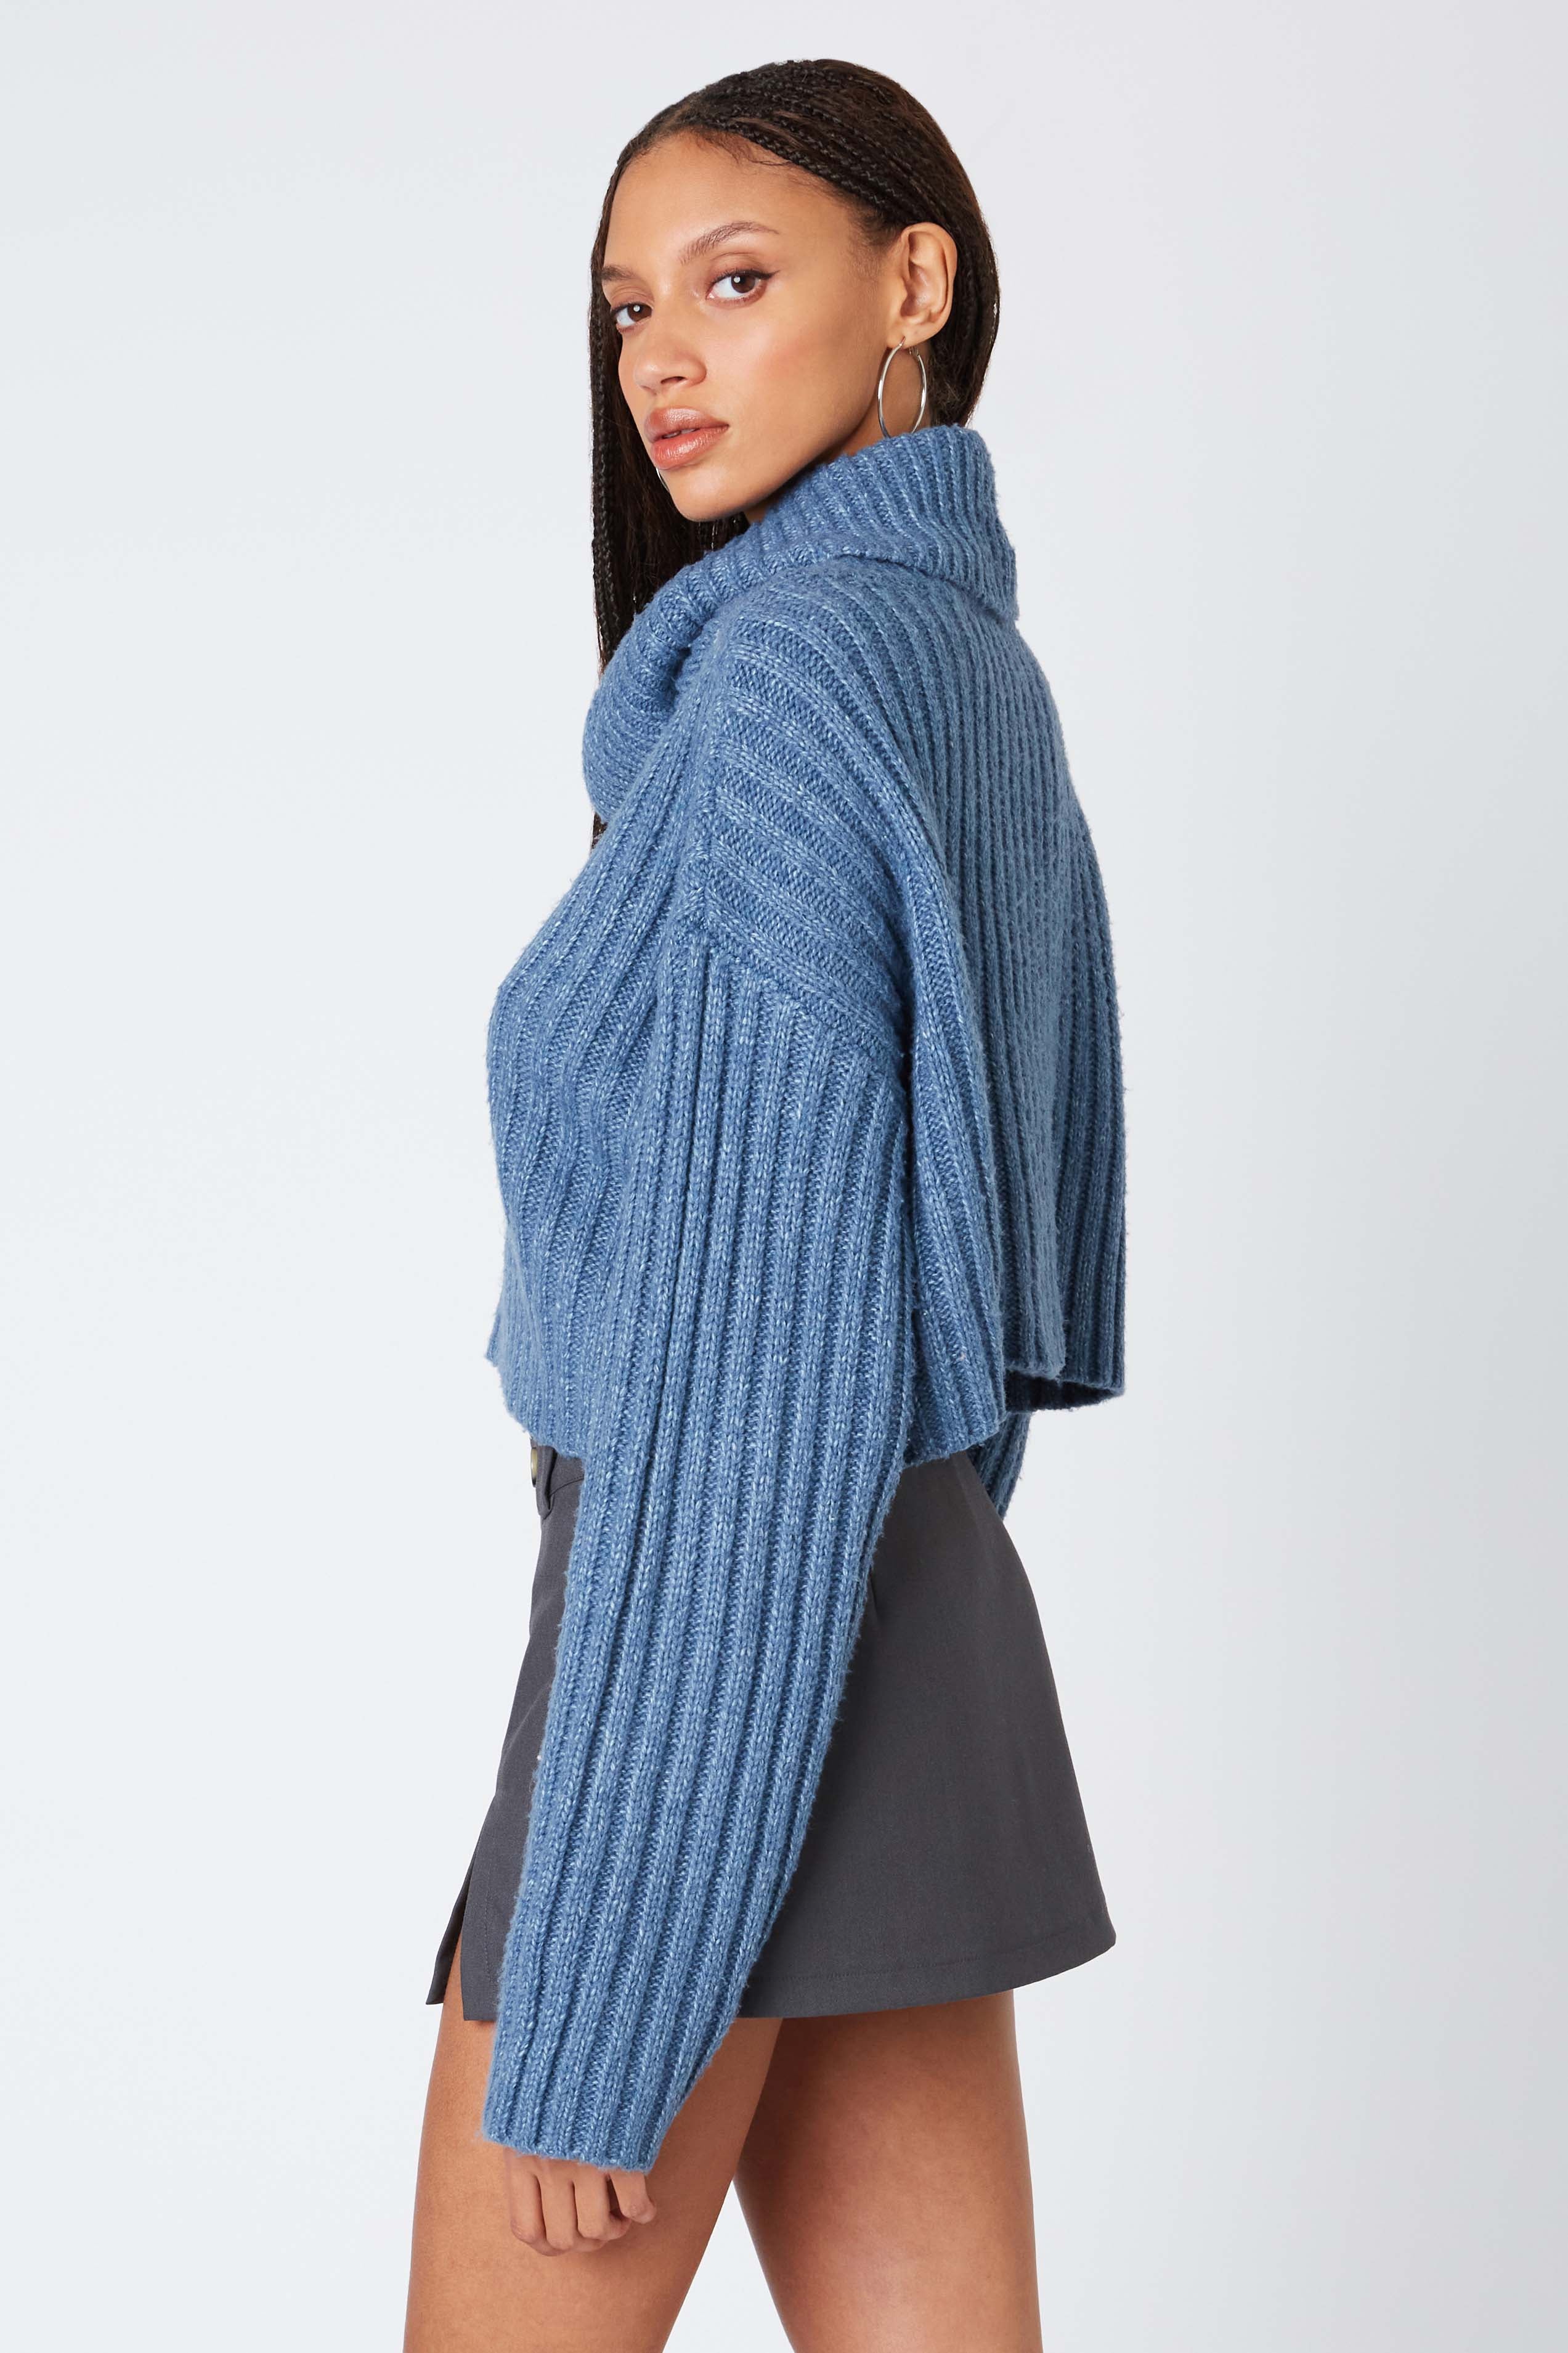 Cropped Turtleneck Sweater in Denim Back View